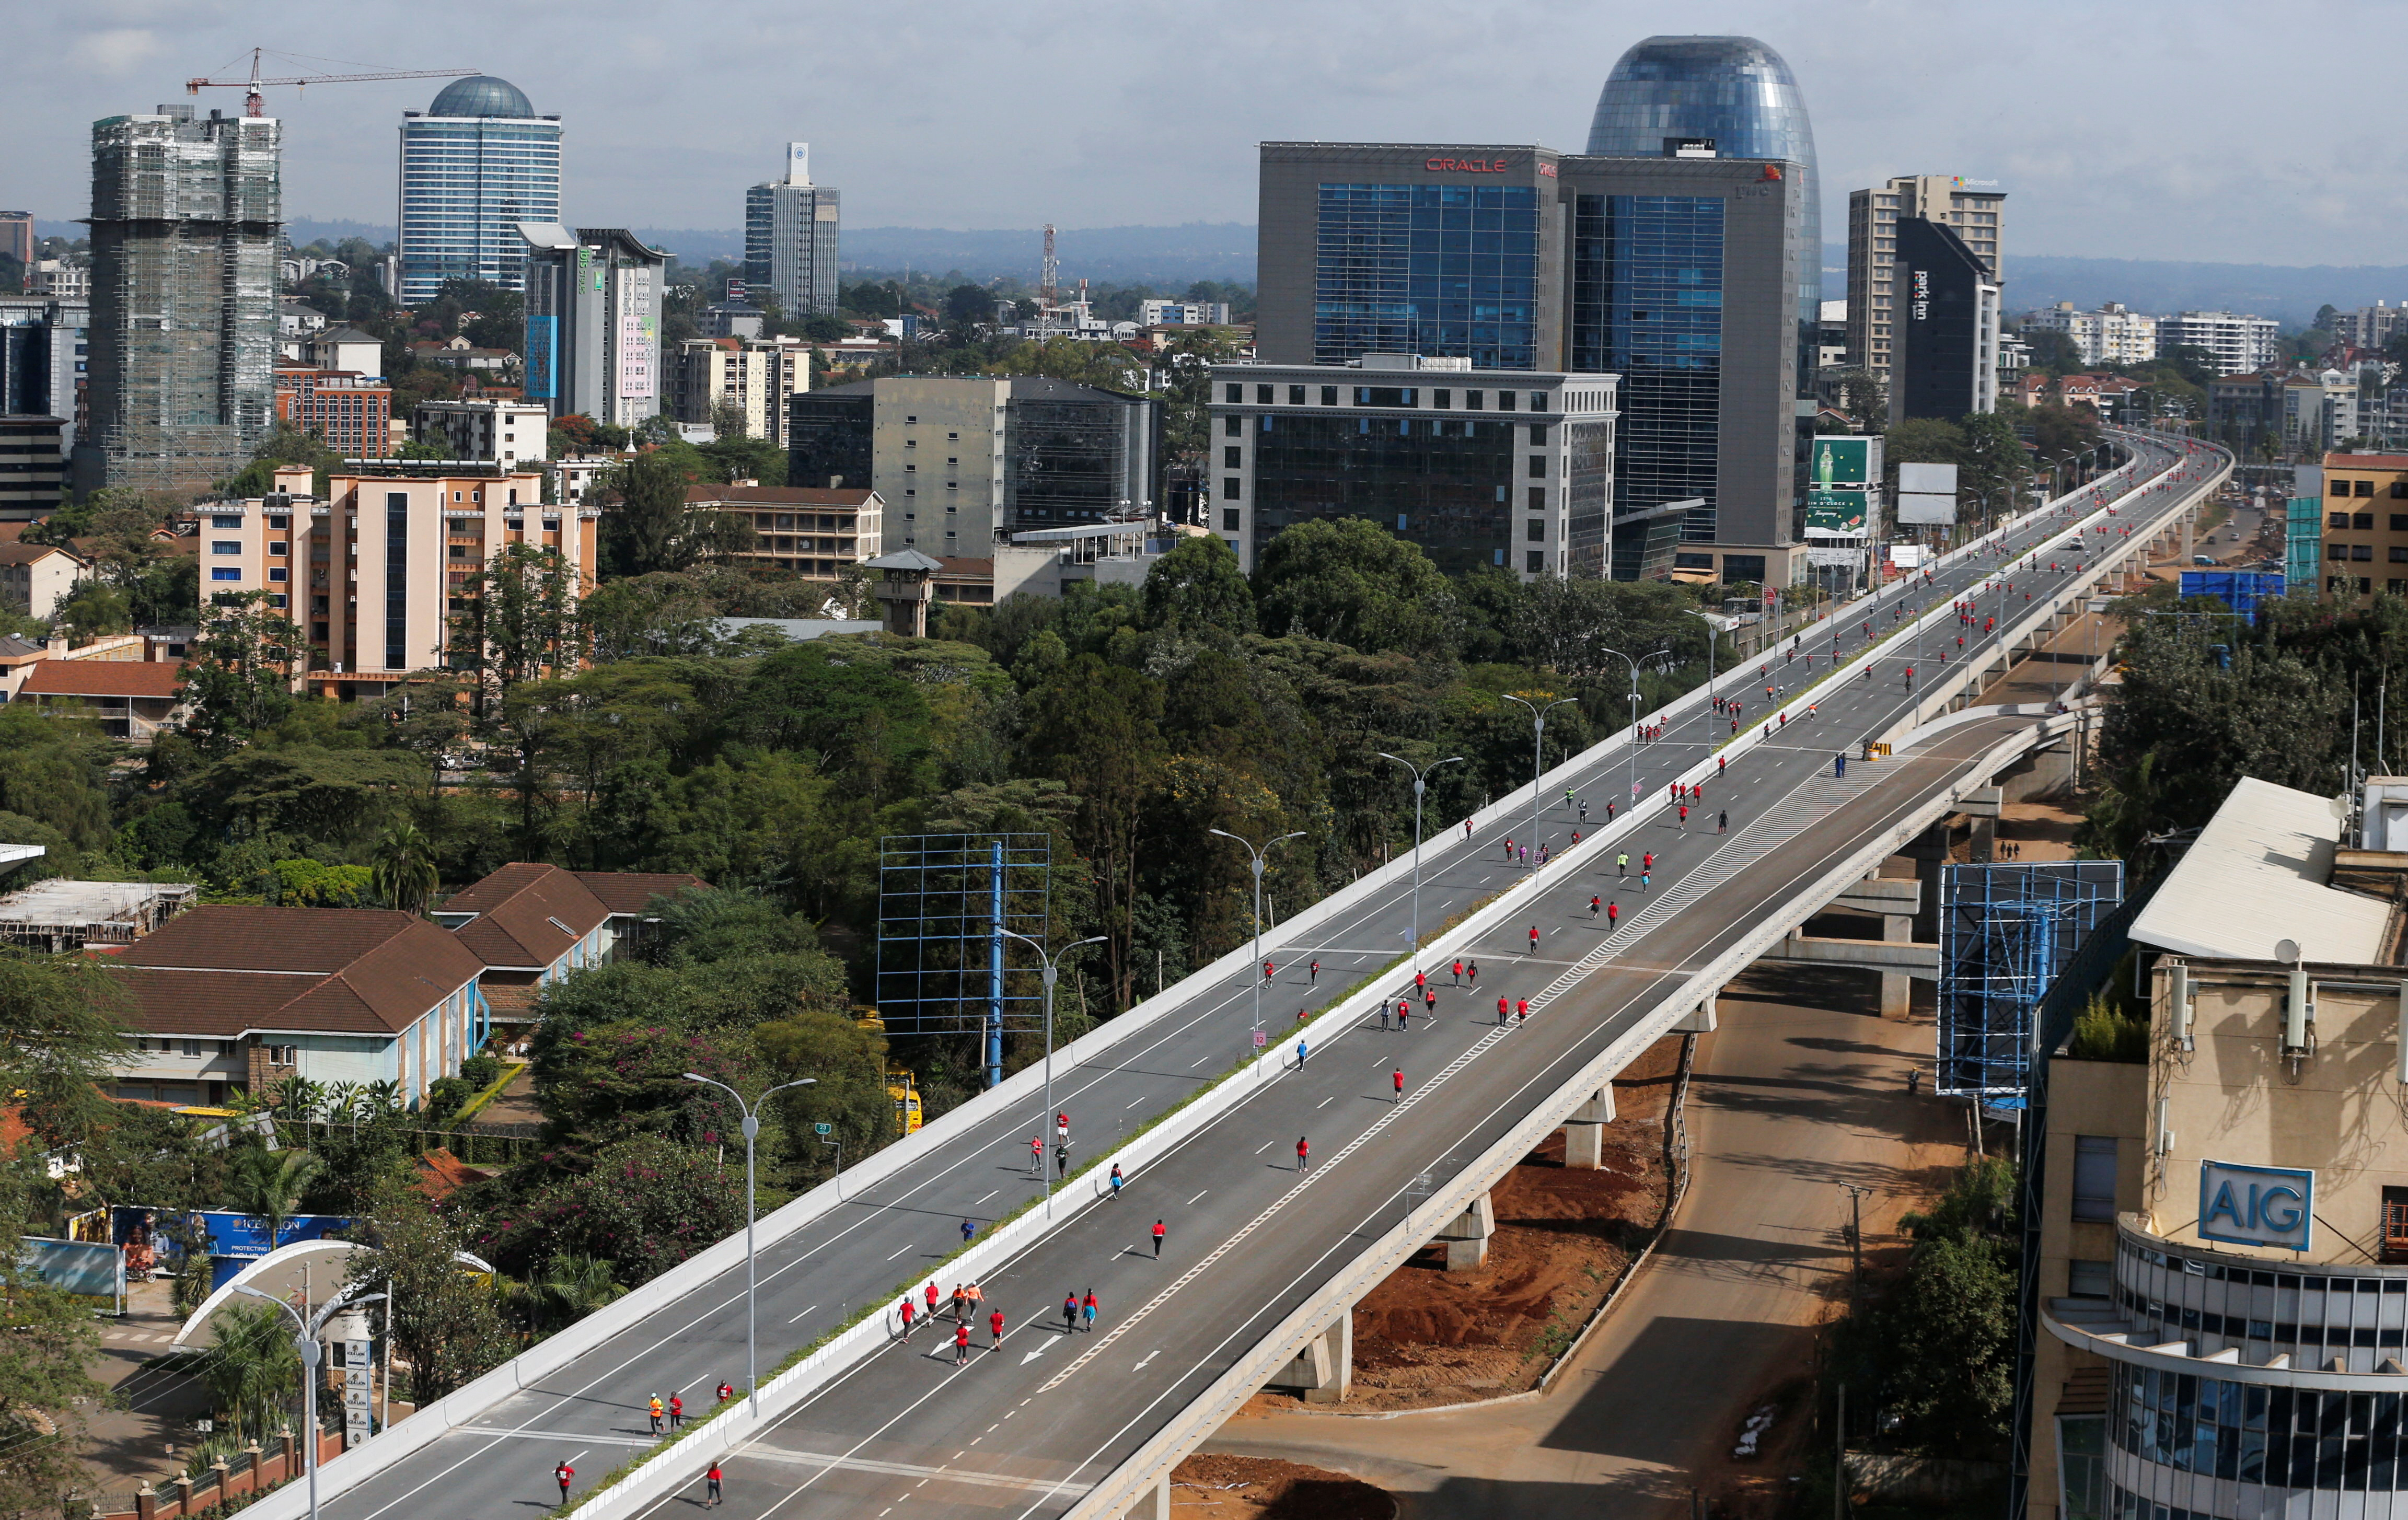 A view shows the cityscape on the Nairobi Expressway undertaken by the China Road and Bridge Corporation along Waiyaki Way within Westlands district of Nairobi